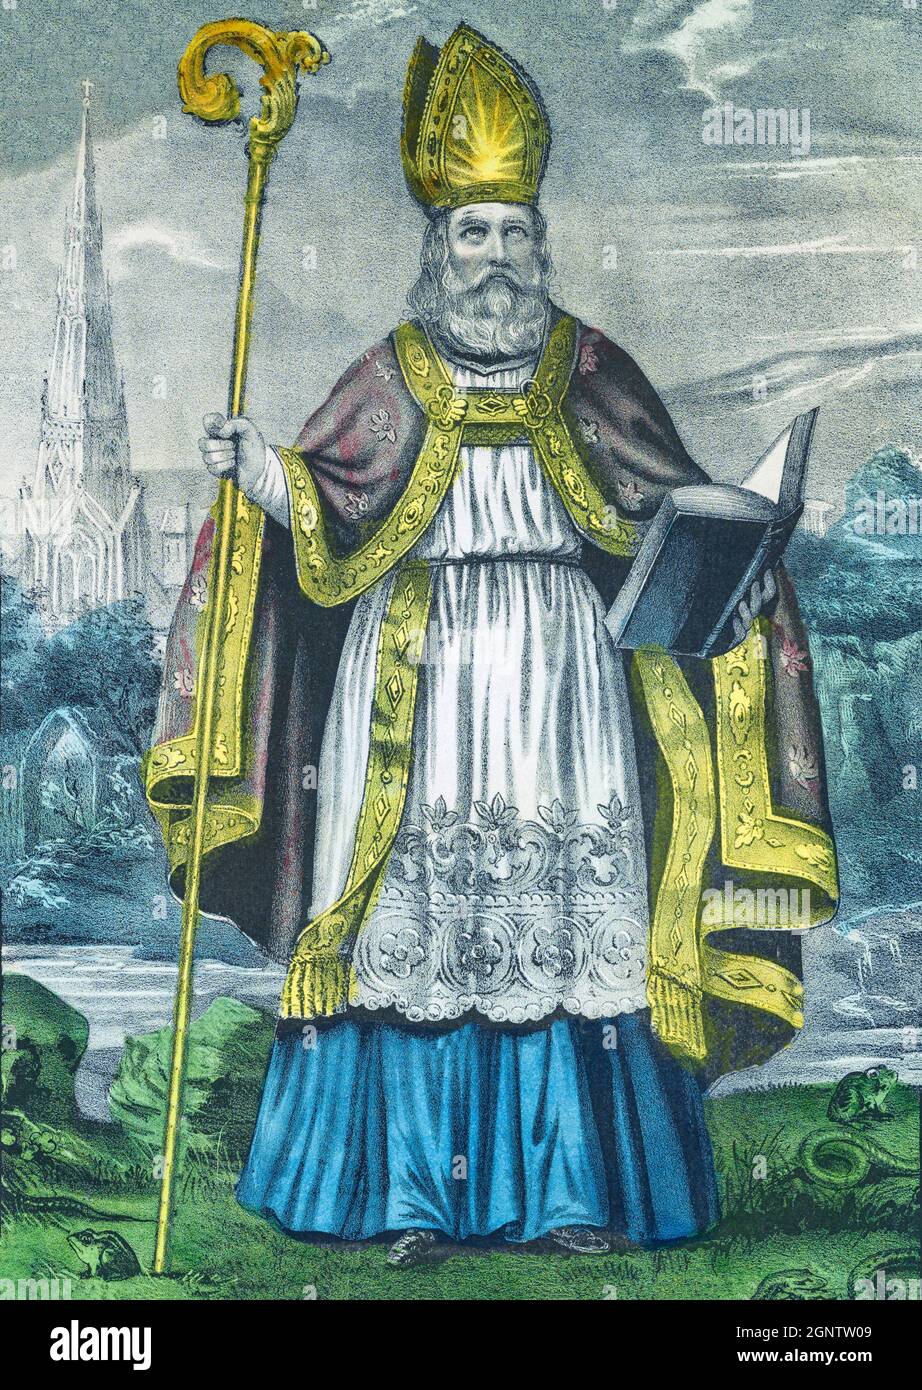 A 19th century sketched painting of Saint Patrick, a fifth-century Romano-British Christian missionary and bishop in Ireland. Known as the 'Apostle of Ireland', he is the primary patron saint of Ireland, the other patron saints being Brigit of Kildare and Columba. Patrick was never formally canonised, nevertheless, he is venerated as a Saint in the Catholic Church and in the Eastern Orthodox Church, where he is regarded as equal-to-the-apostles and Enlightener of Ireland. Stock Photo